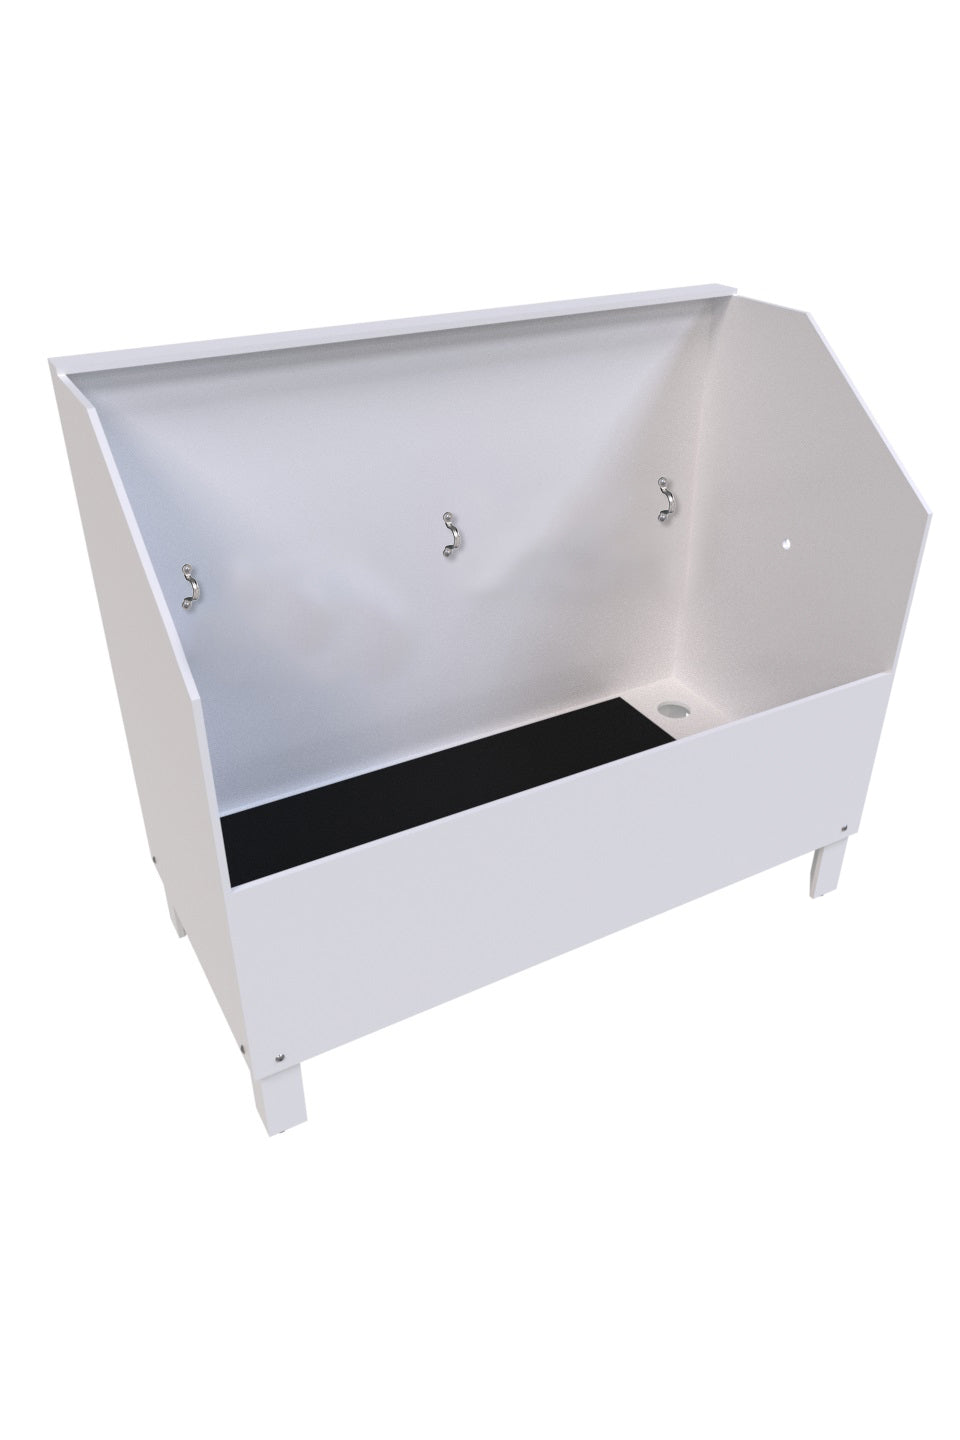 Poly Pet Tubs Professional Dog Grooming Tub with Ramp 58"-Bath Tubs-Pet's Choice Supply